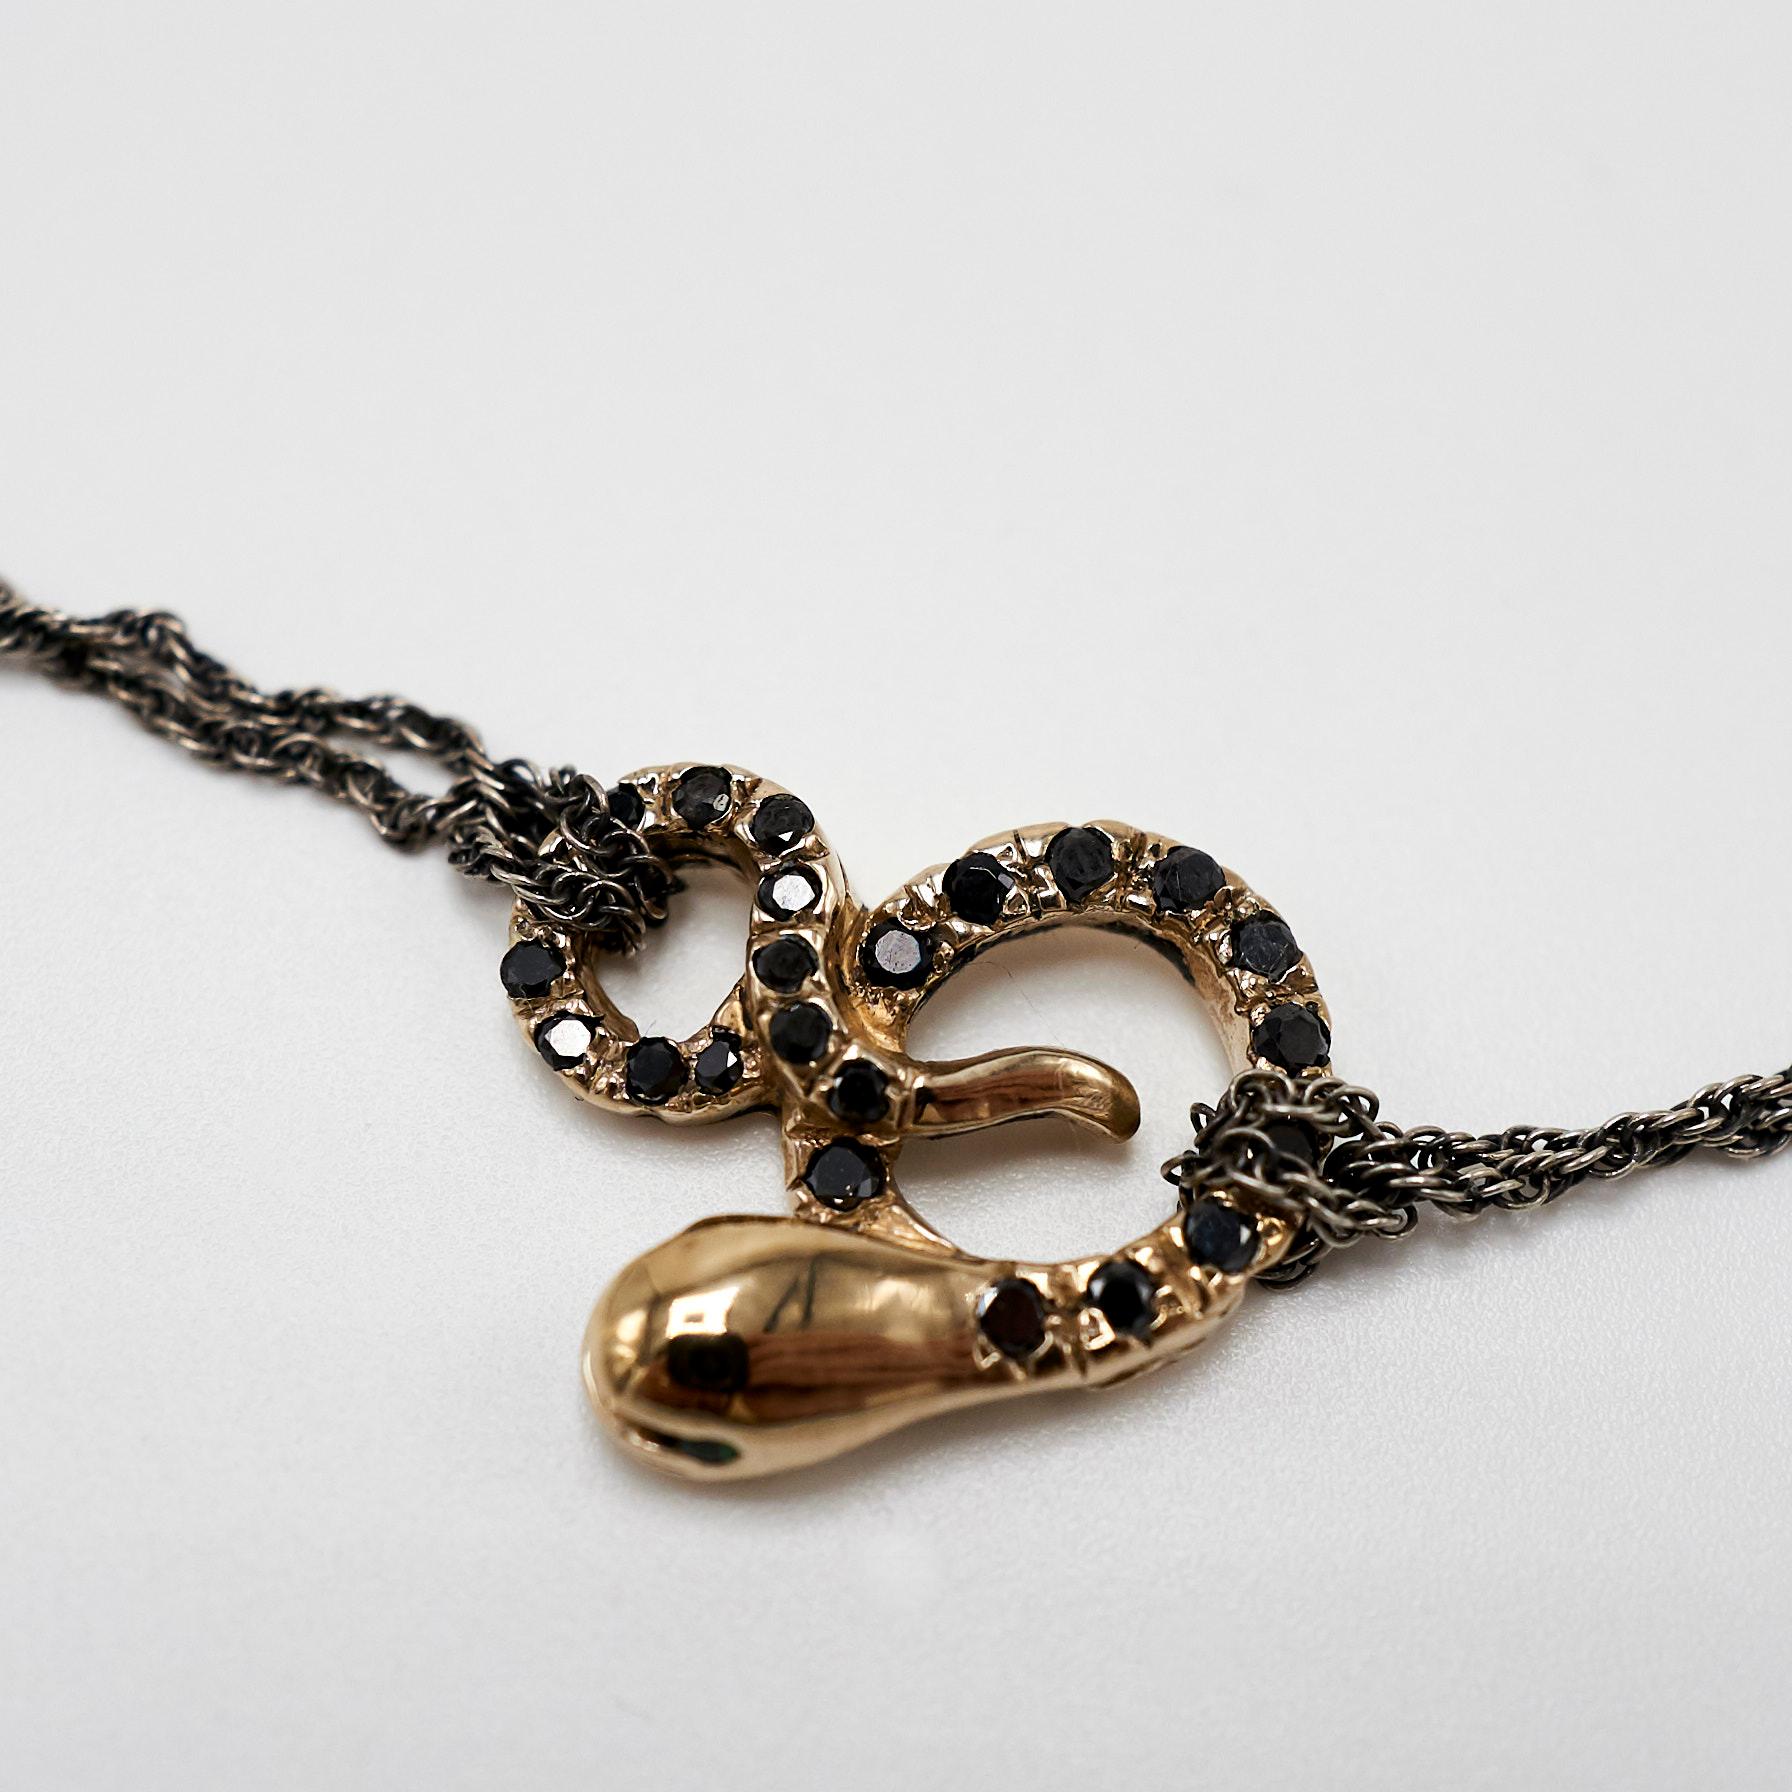 Black Diamond Emerald 14K Yellow Gold Snake Necklace Pendant Sterling Silver Chain J Dauphin

J DAUPHIN Made in 14K Gold with Silver Chain

Inspired by the victorian time

Hand Made in Los Angeles

This piece is made to order and will take 3-4 weeks